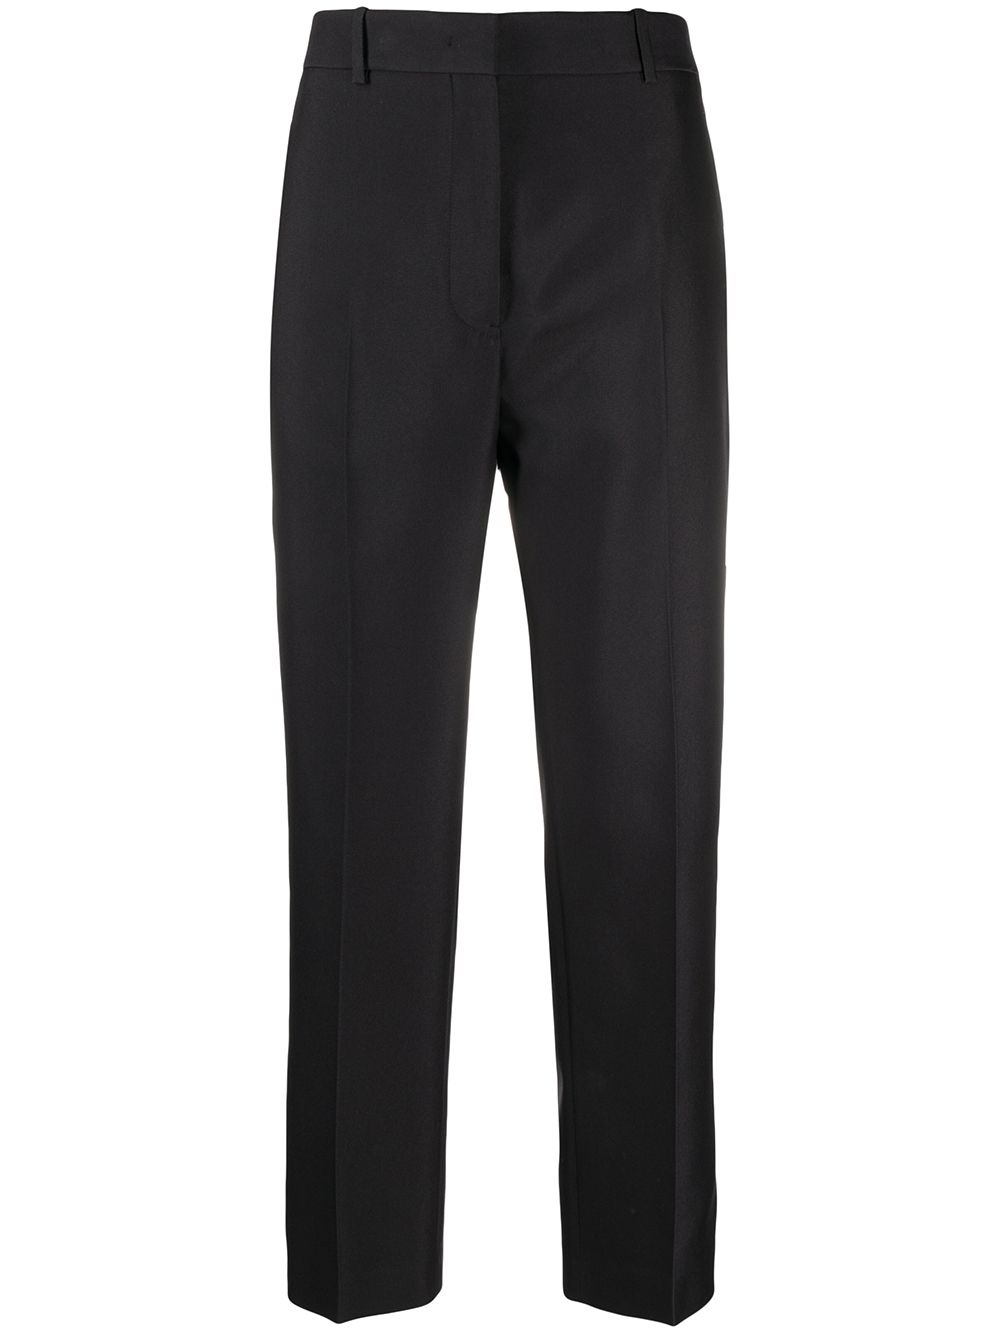 JIL SANDER PLEATED CROPPED TROUSERS